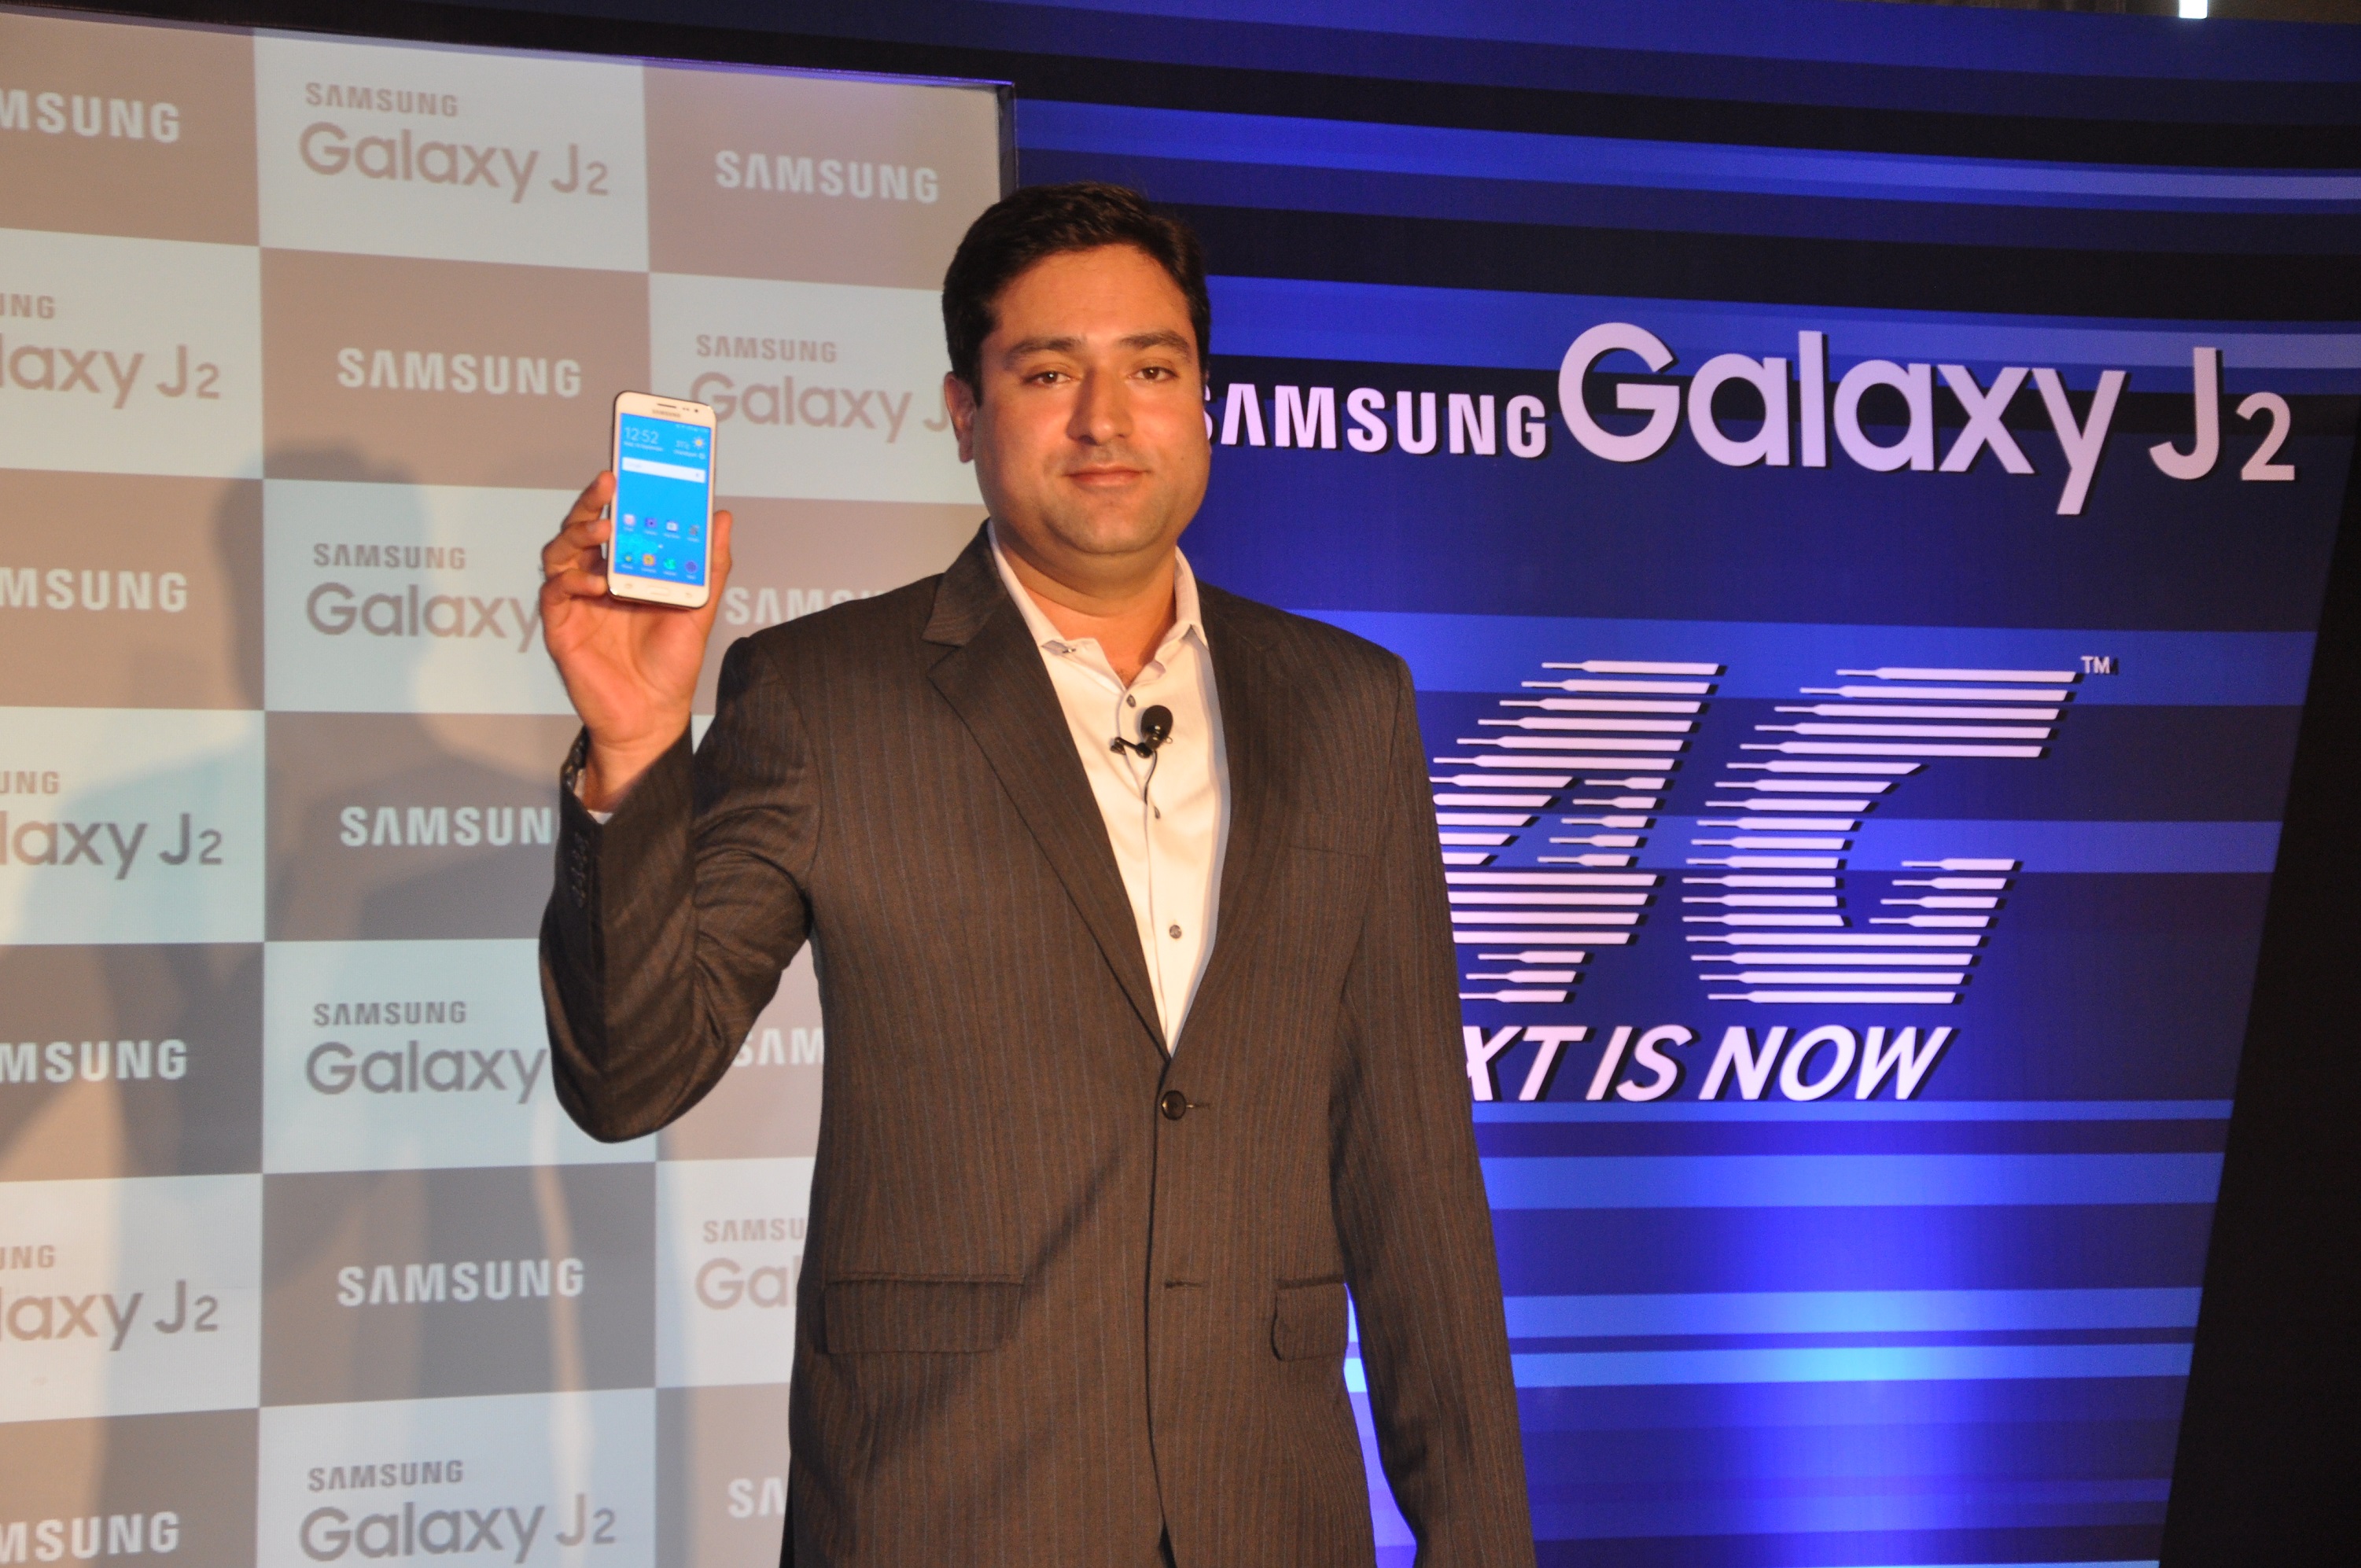 Samsung Introduces Galaxy J2 Makes 4g Accessible And Relevant For India Samsung Newsroom India